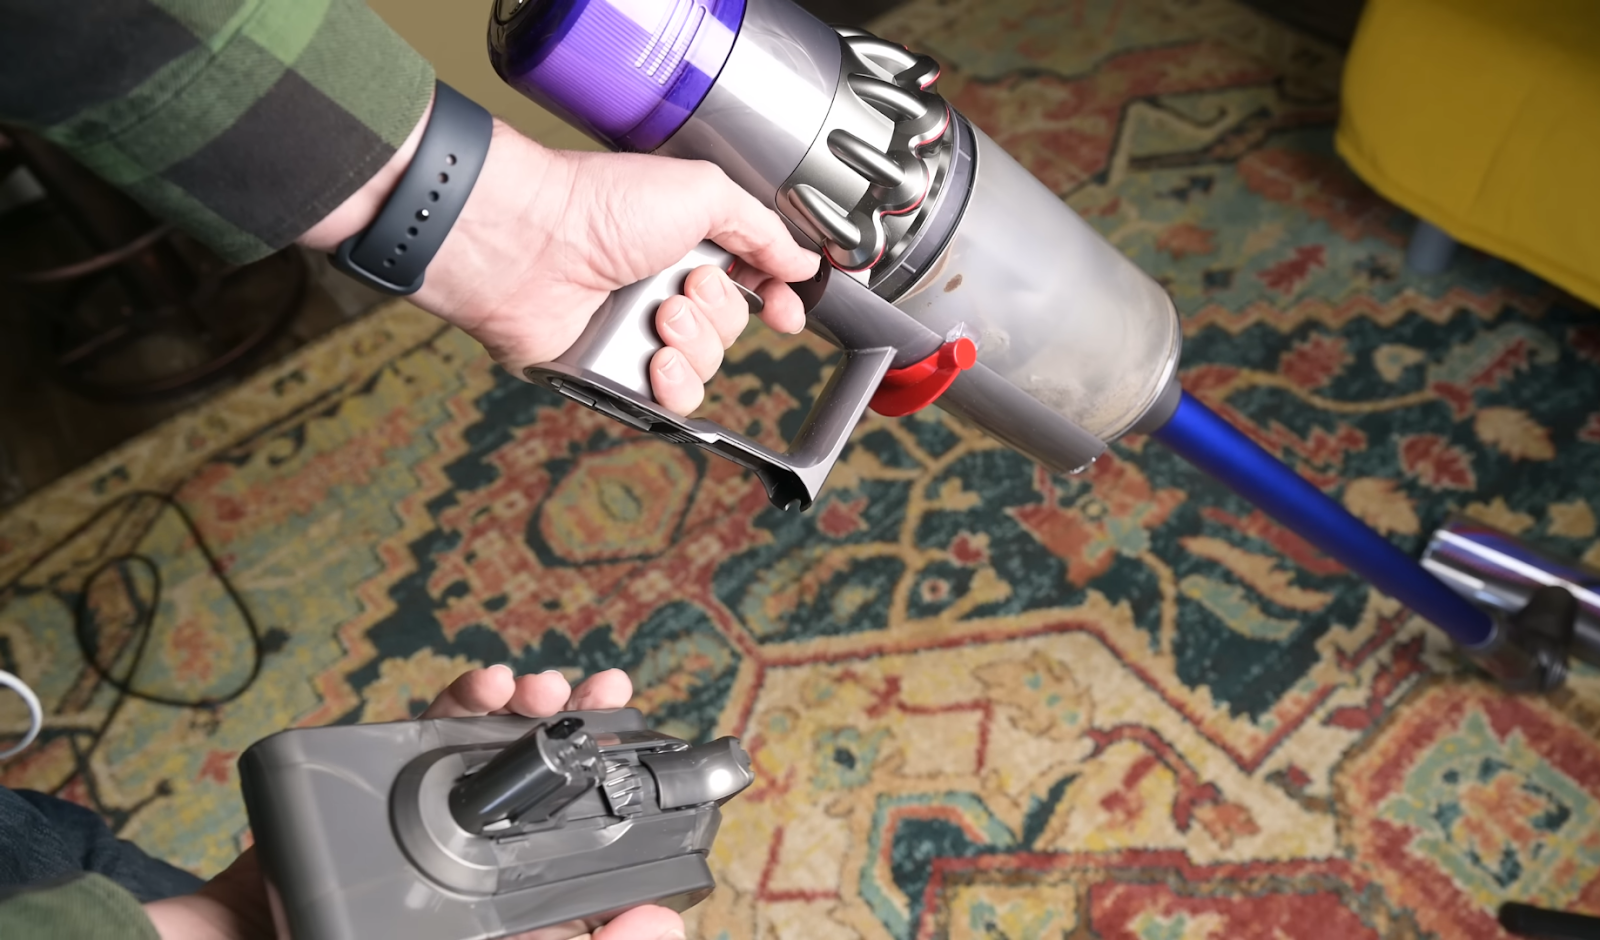 Person detaching the battery from the Dyson V11 cordless vacuum